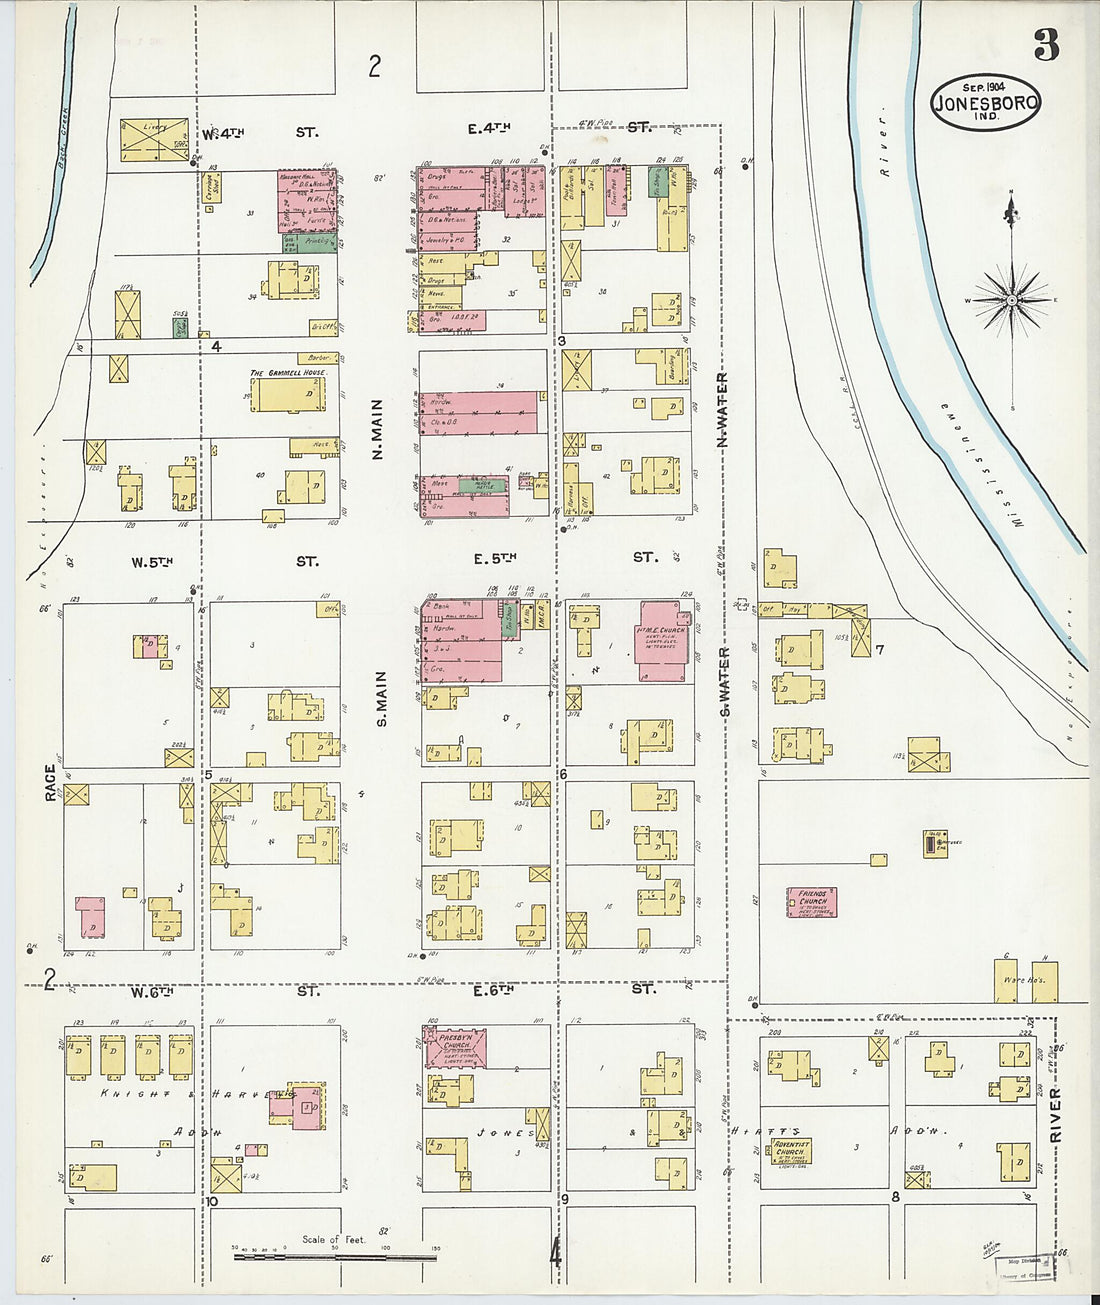 This old map of Jonesboro, Grant County, Indiana was created by Sanborn Map Company in 1904